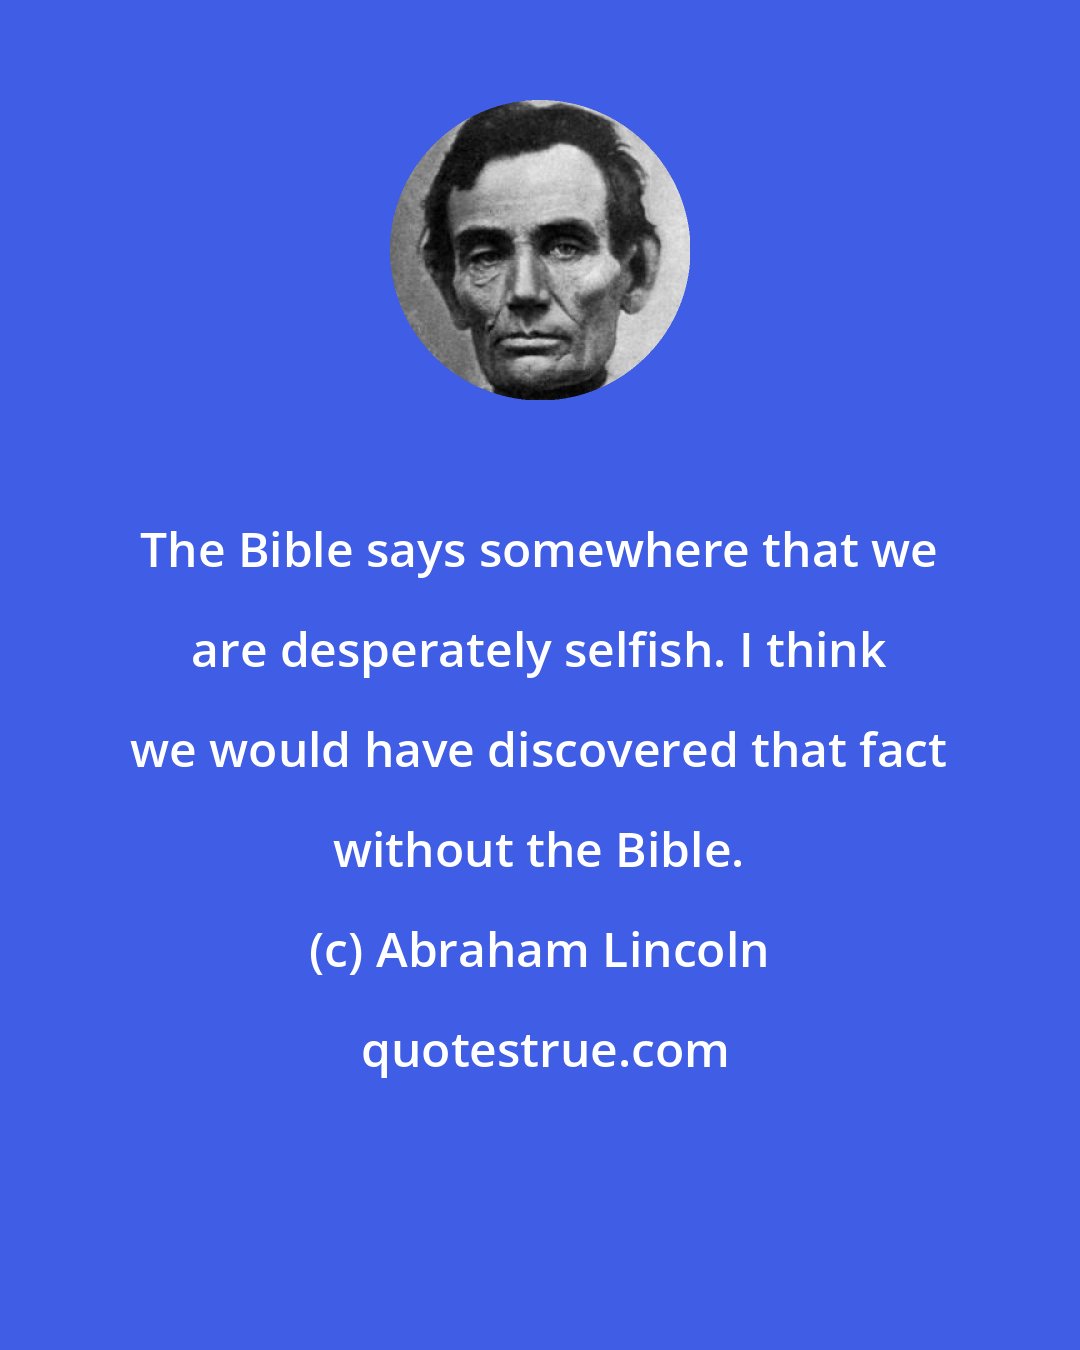 Abraham Lincoln: The Bible says somewhere that we are desperately selfish. I think we would have discovered that fact without the Bible.